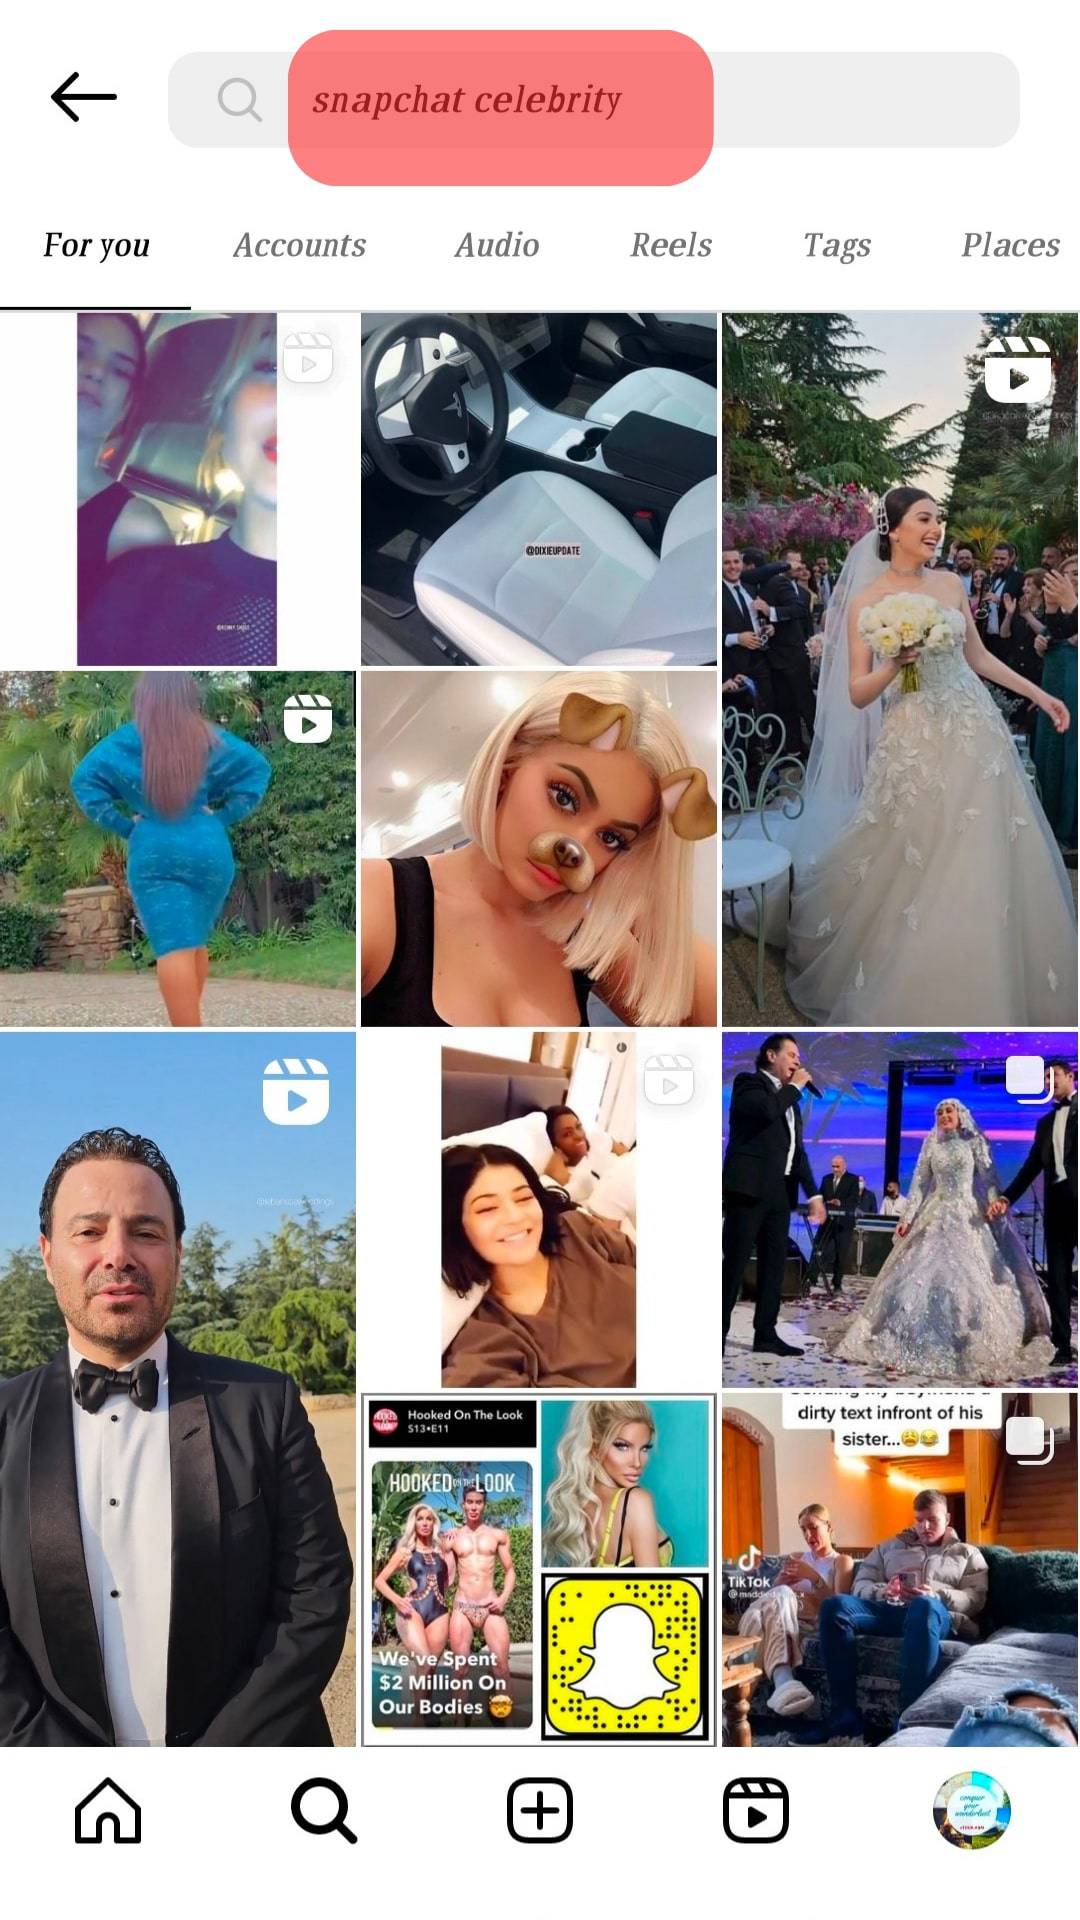 Type “Snapchat Celebrity” In The Search Bar.